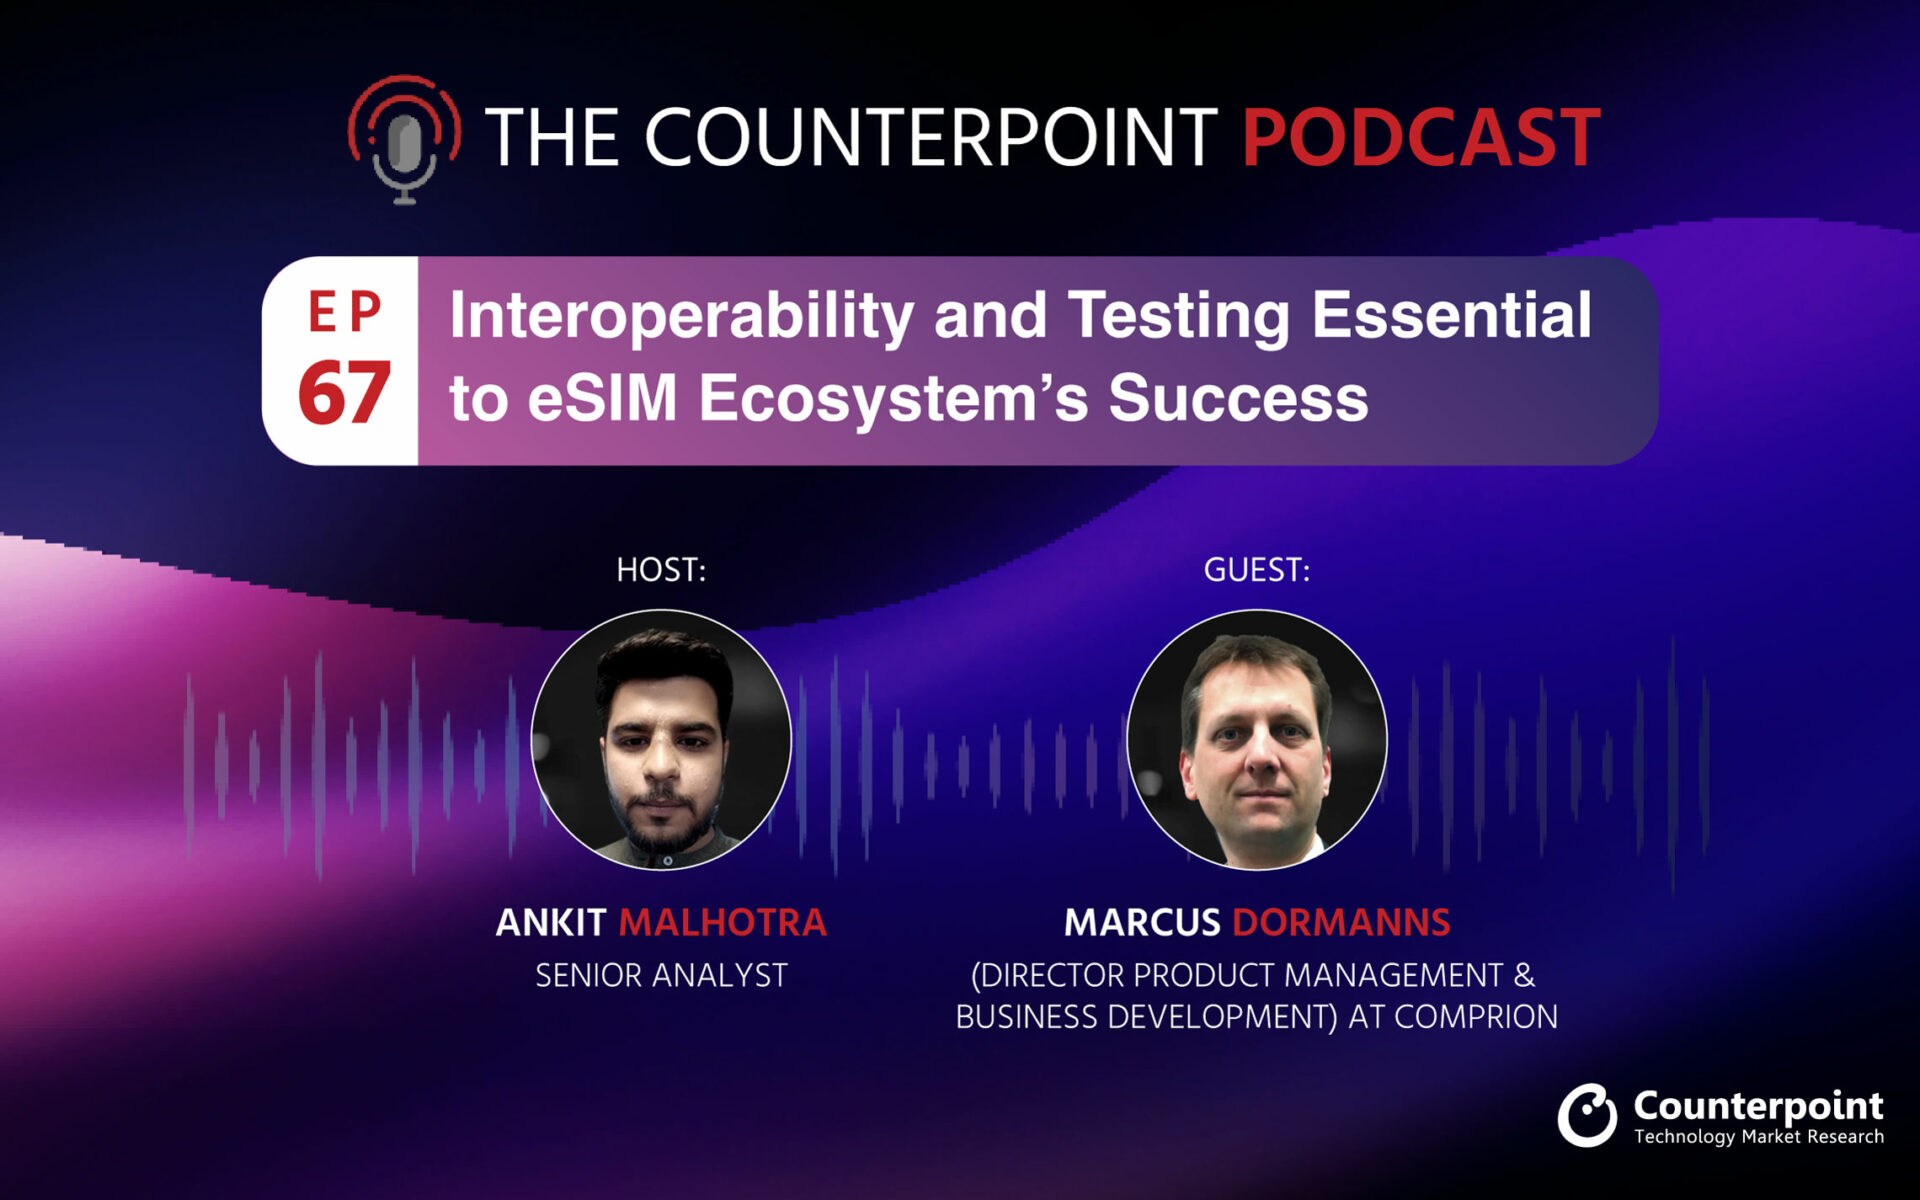 Podcast #67: Interoperability and Testing Essential to eSIM Ecosystem’s Success